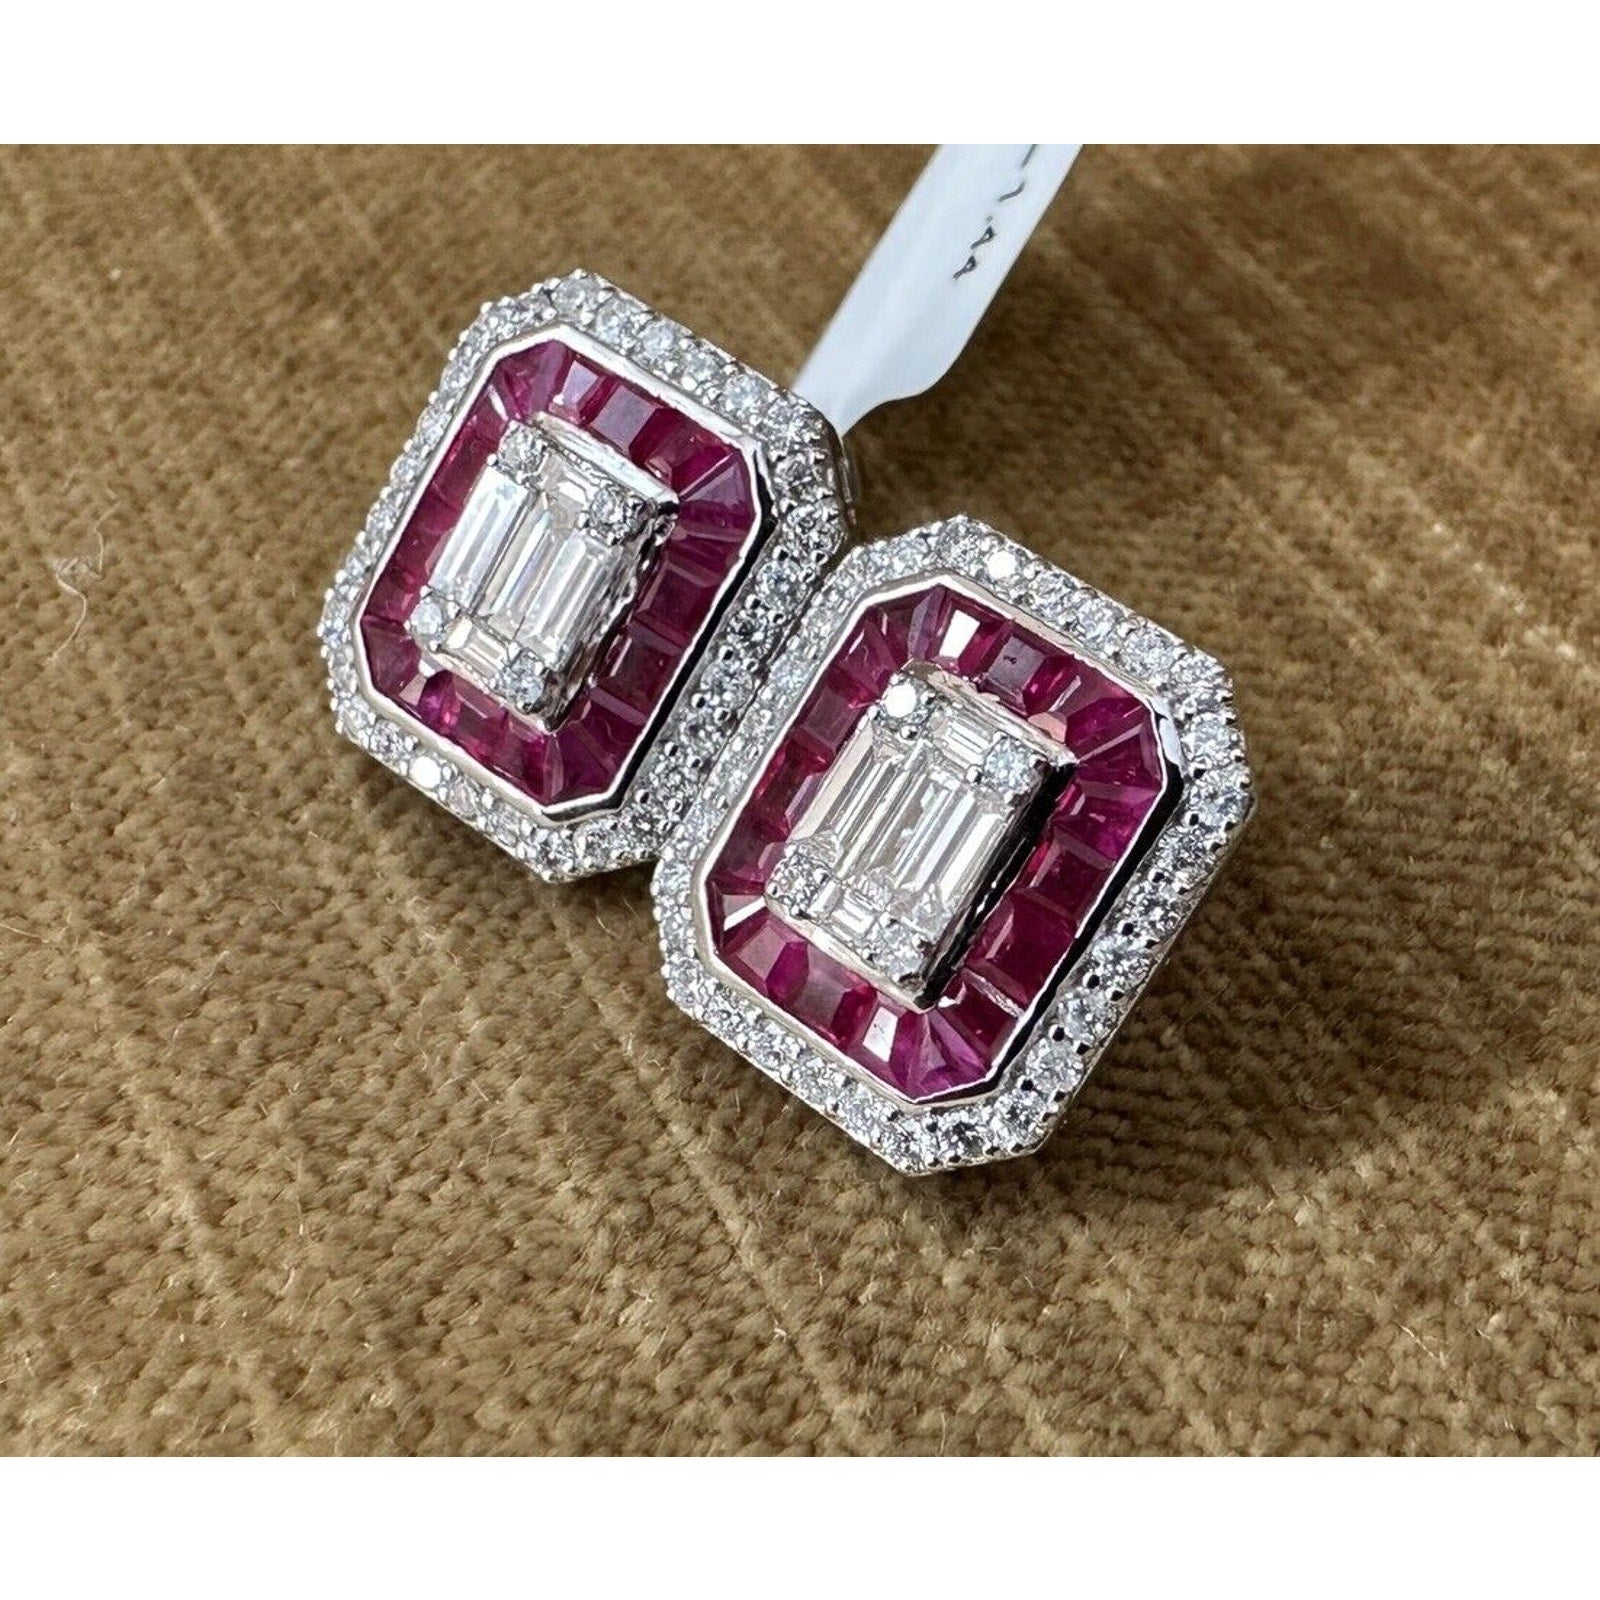 Ruby and Diamond Illusion set Earrings in 18k White Gold - HM2537AB